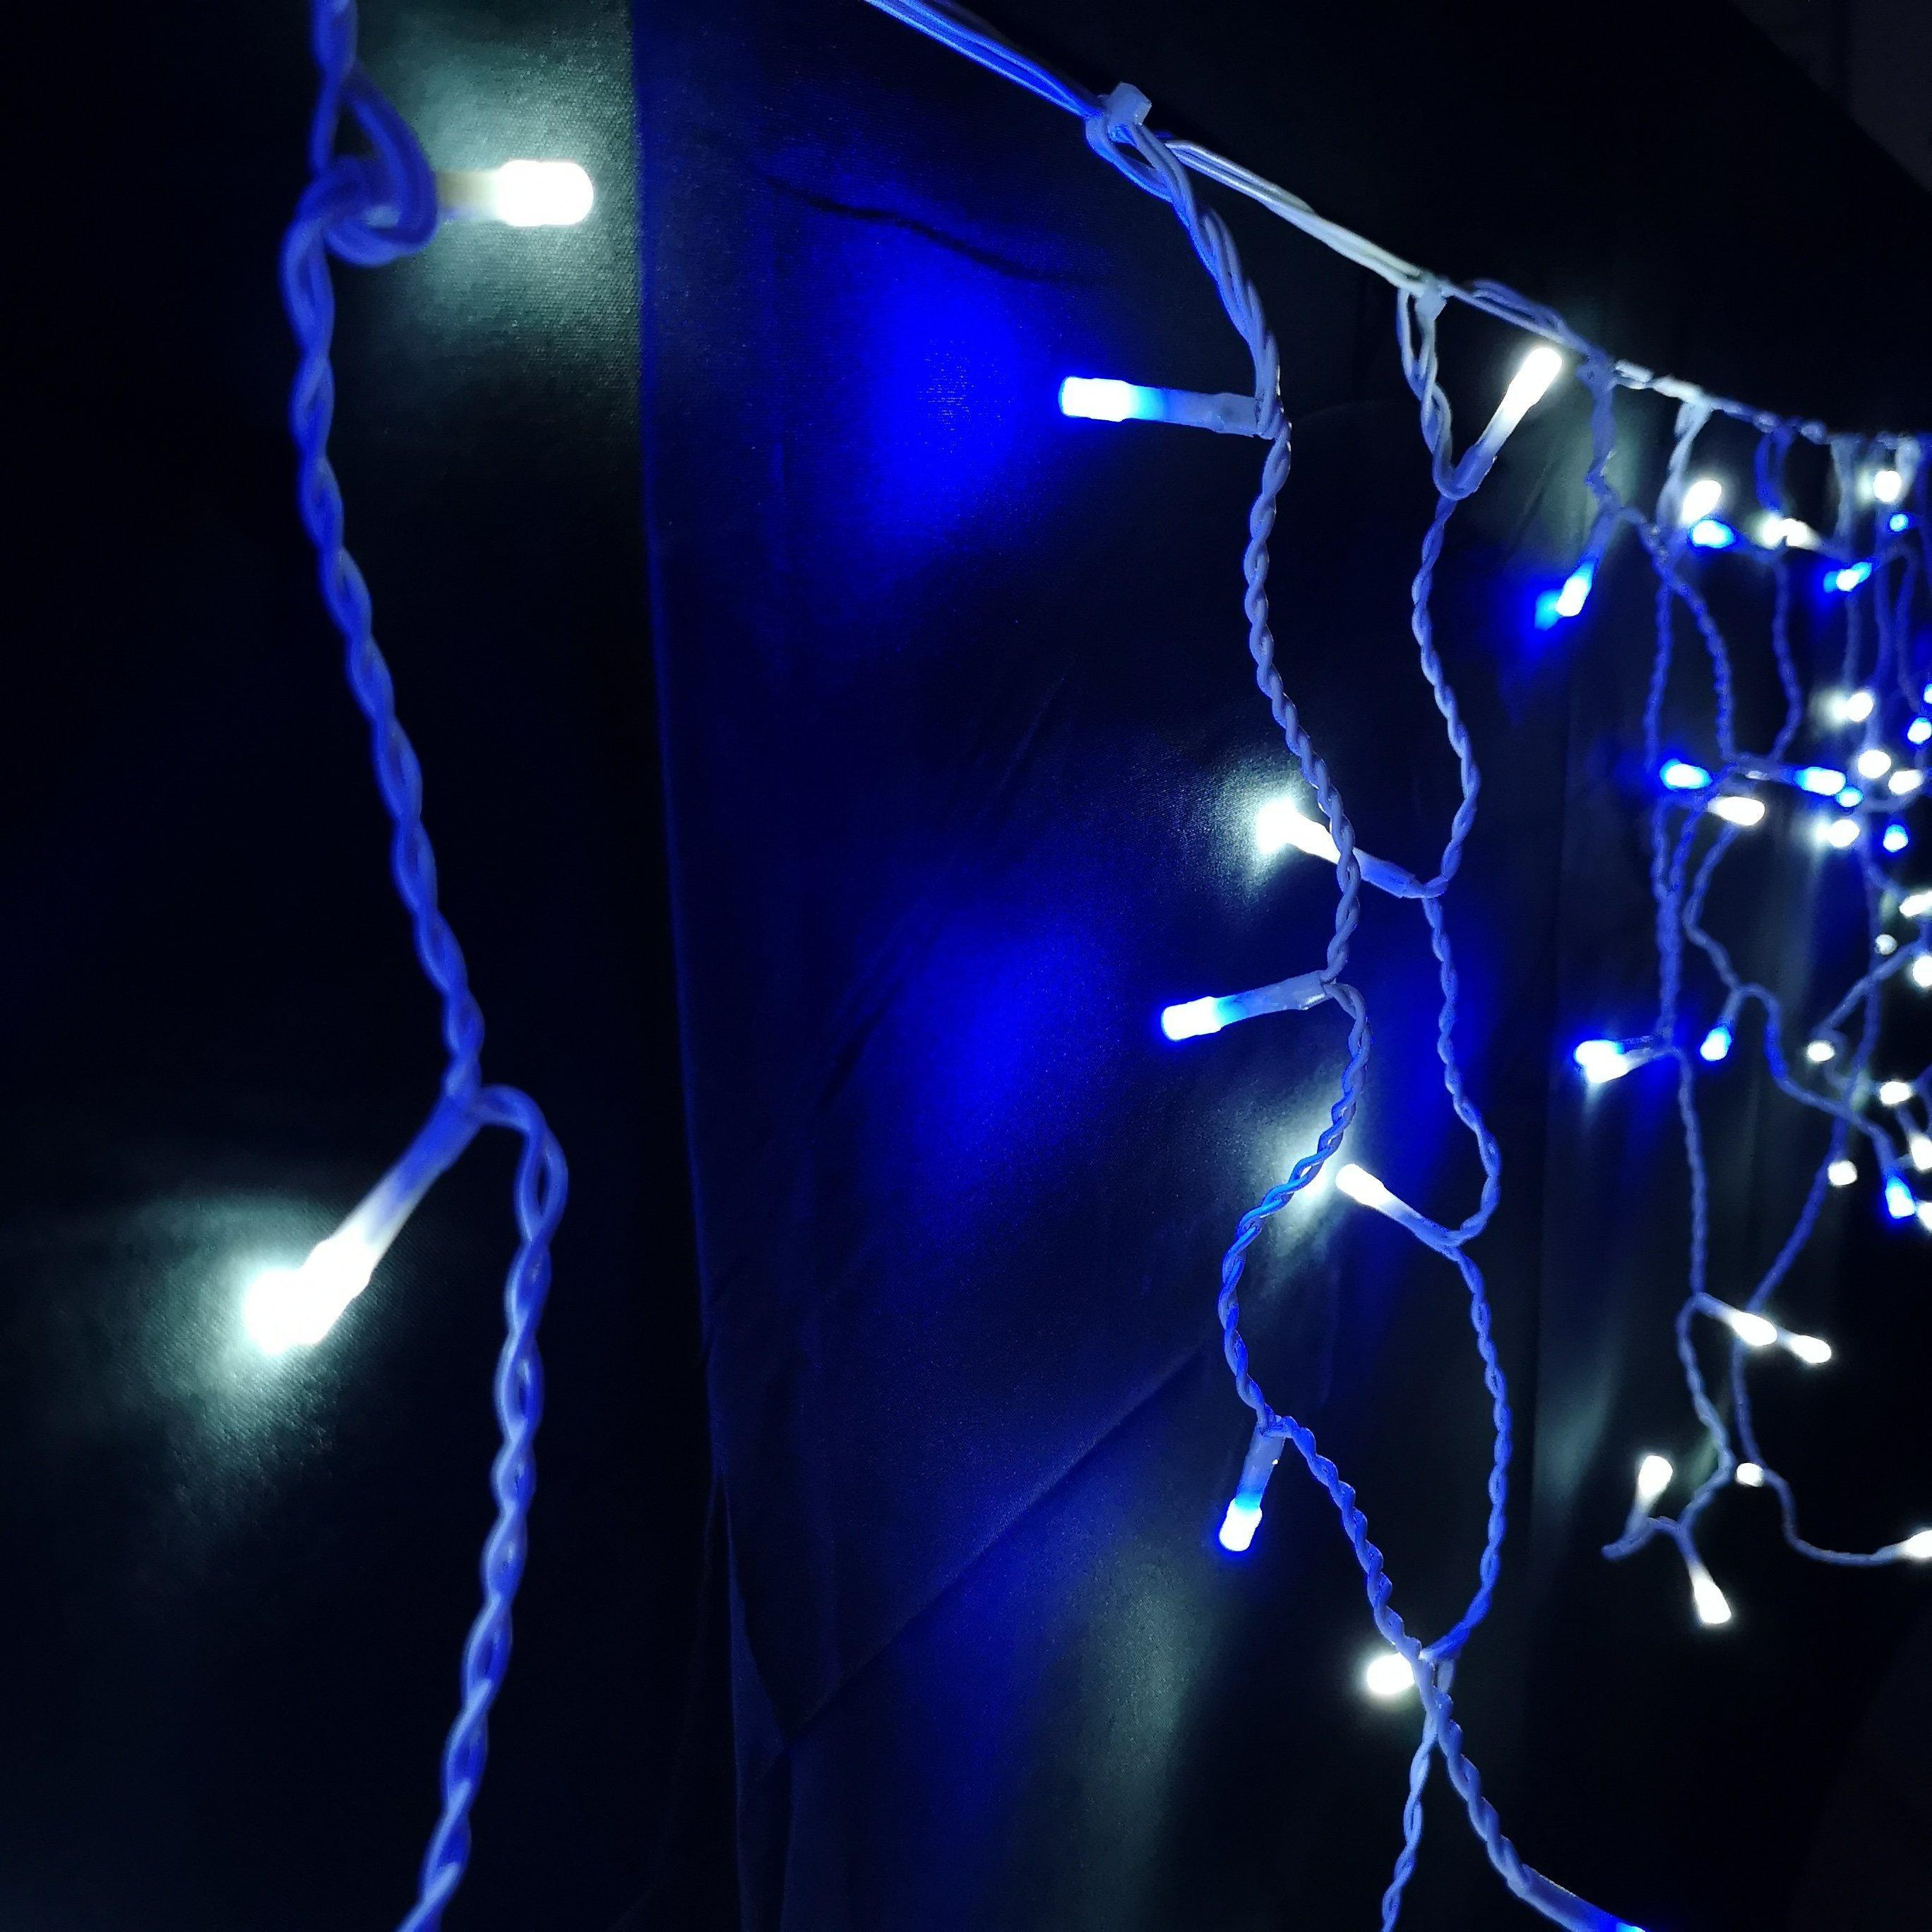 300 LED 7.5m Premier Christmas Outdoor 8 Function Icicle Lights Blue & White - image 1